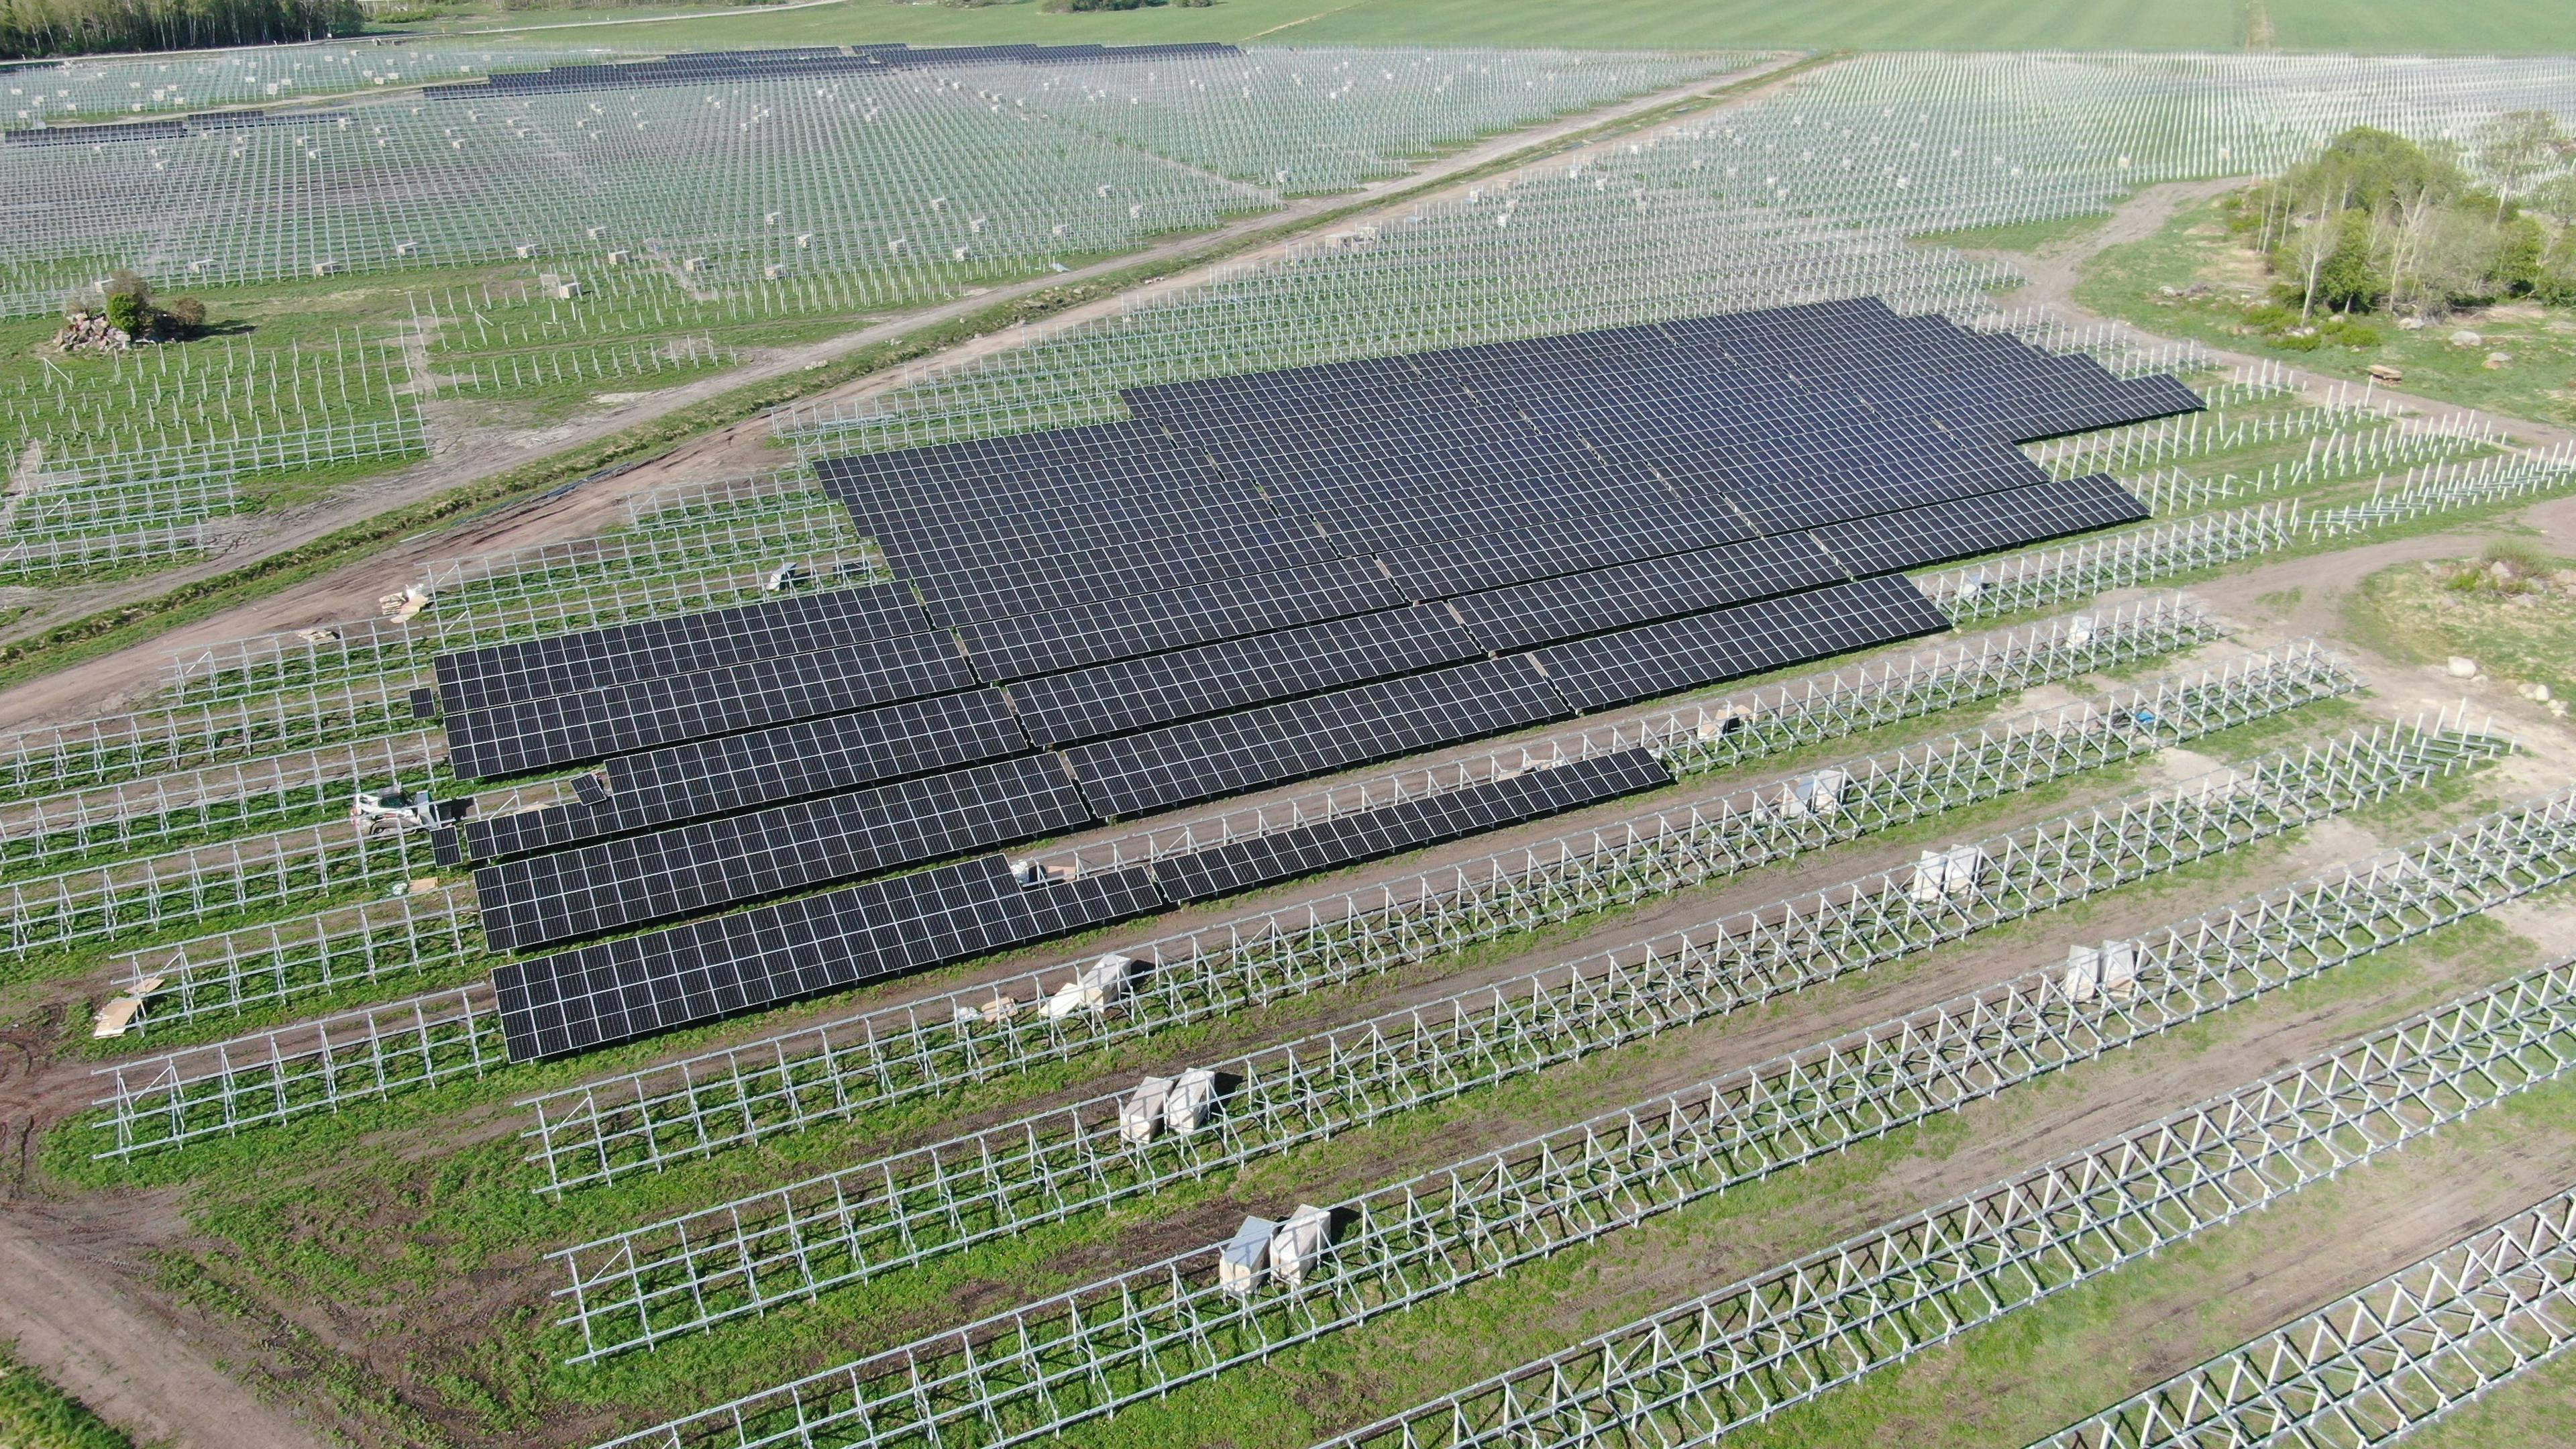 Construction has begun on a 64-megawatt utility-scale PV plant in Sweden